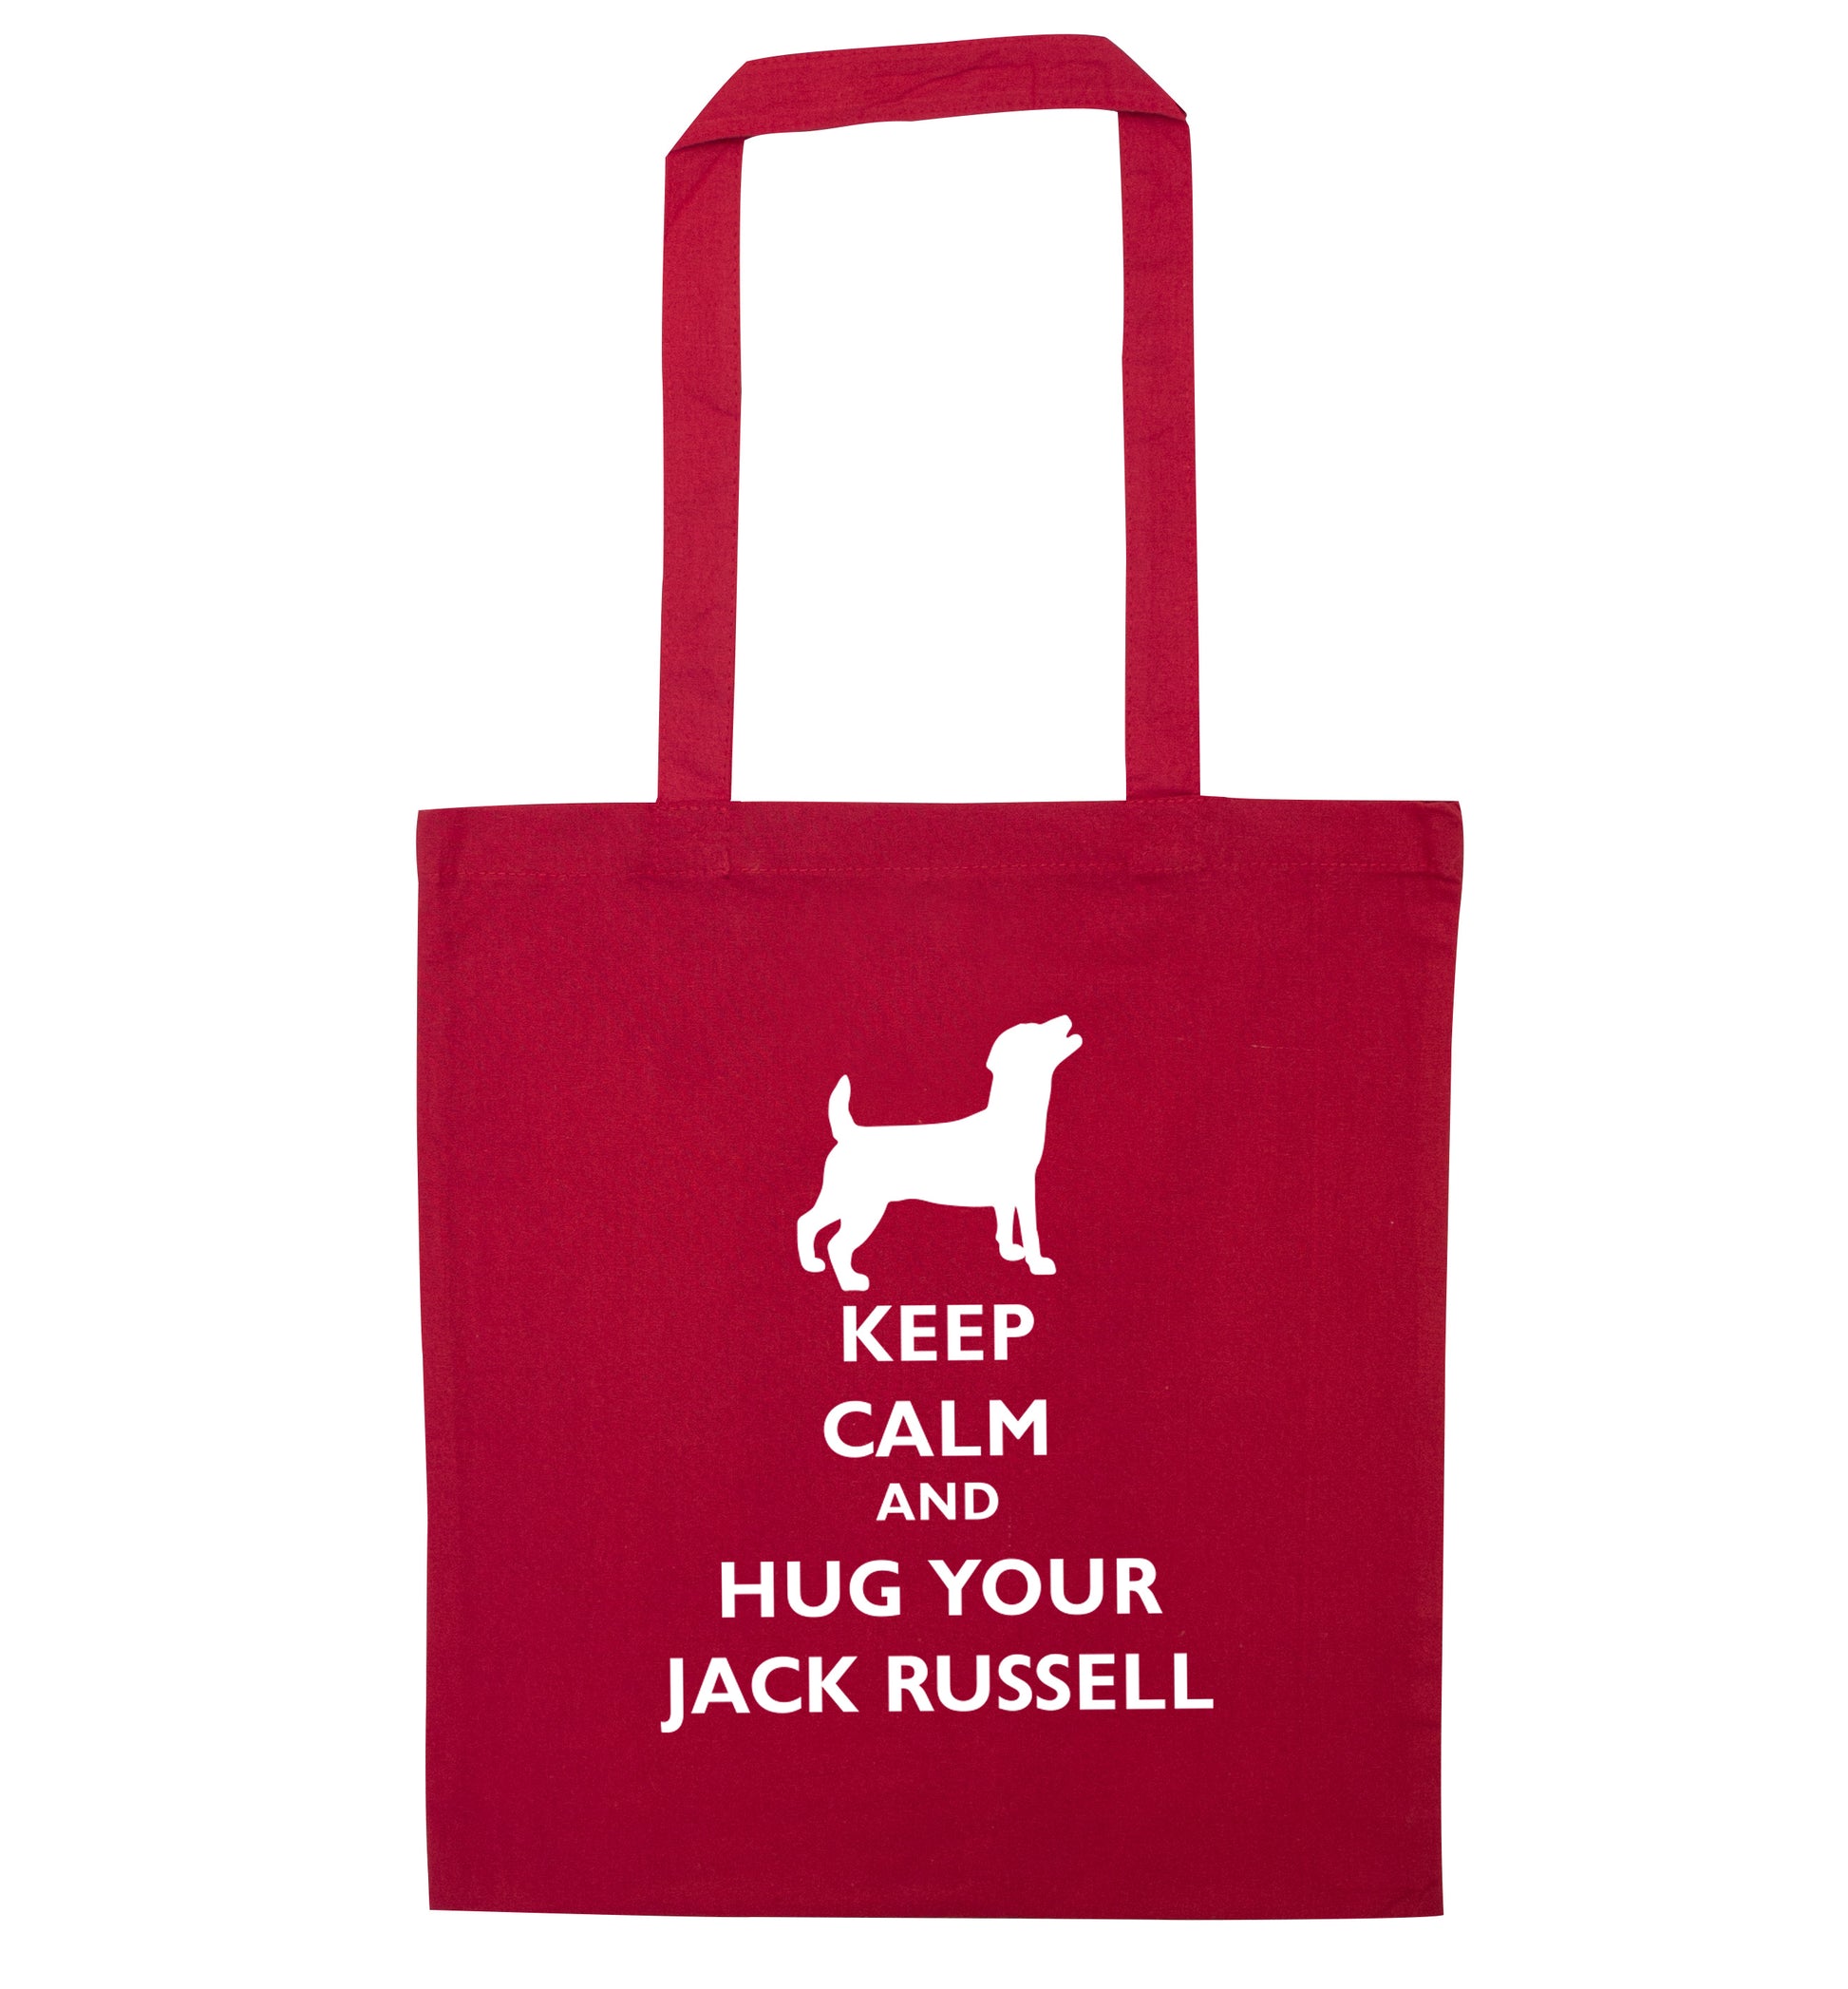 Keep calm and hug your jack russell red tote bag